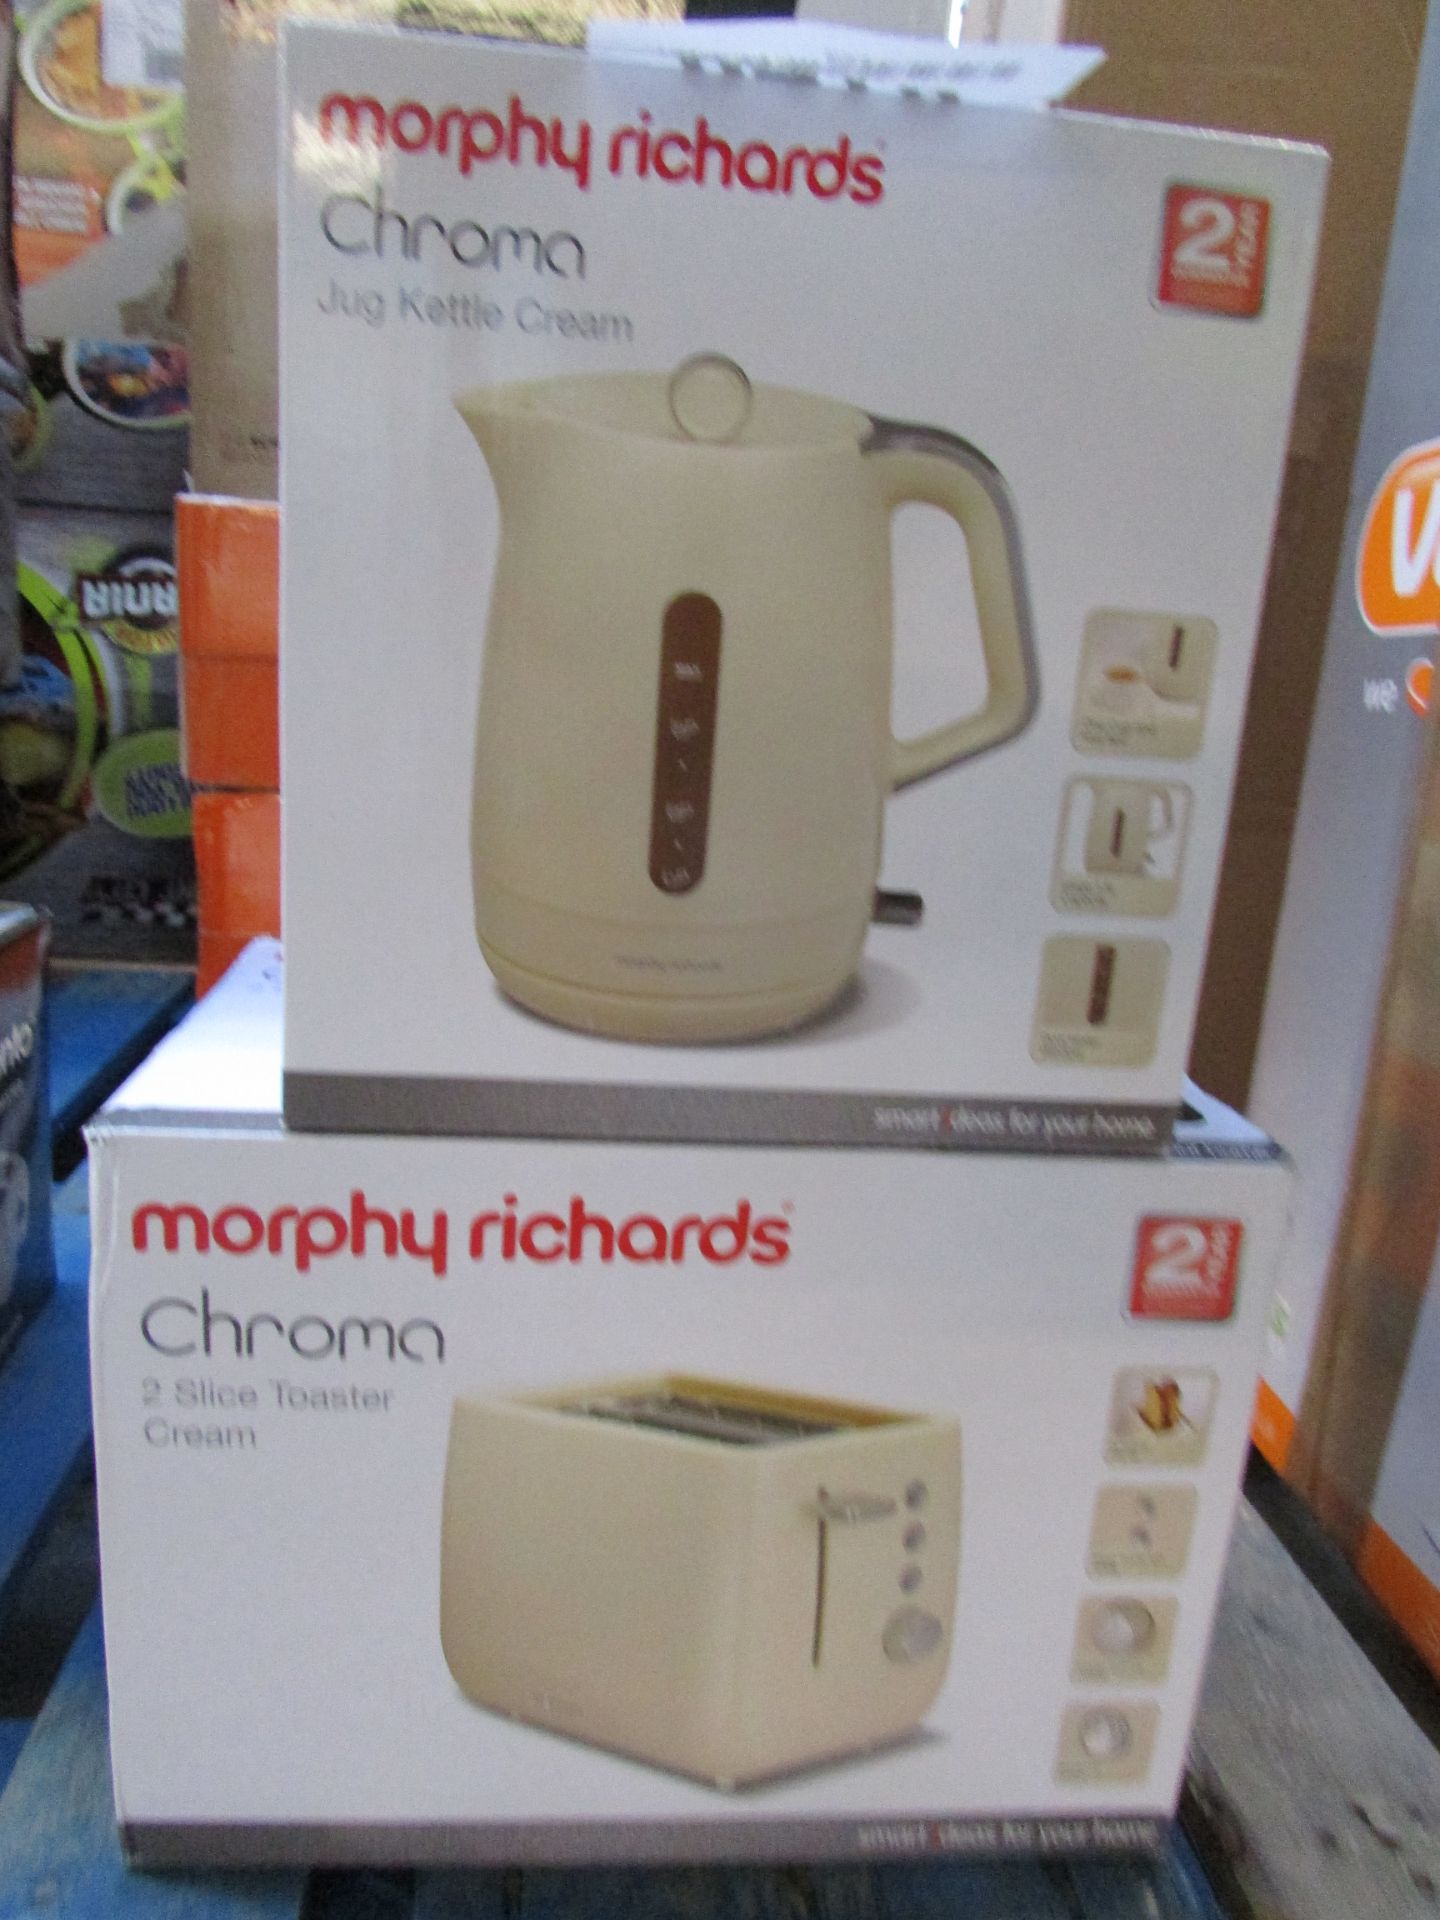 2X MORPHY RICHARDS CHROMA JUG KETTLE AND 2 SLICE TOASTER OATH IN CREAM